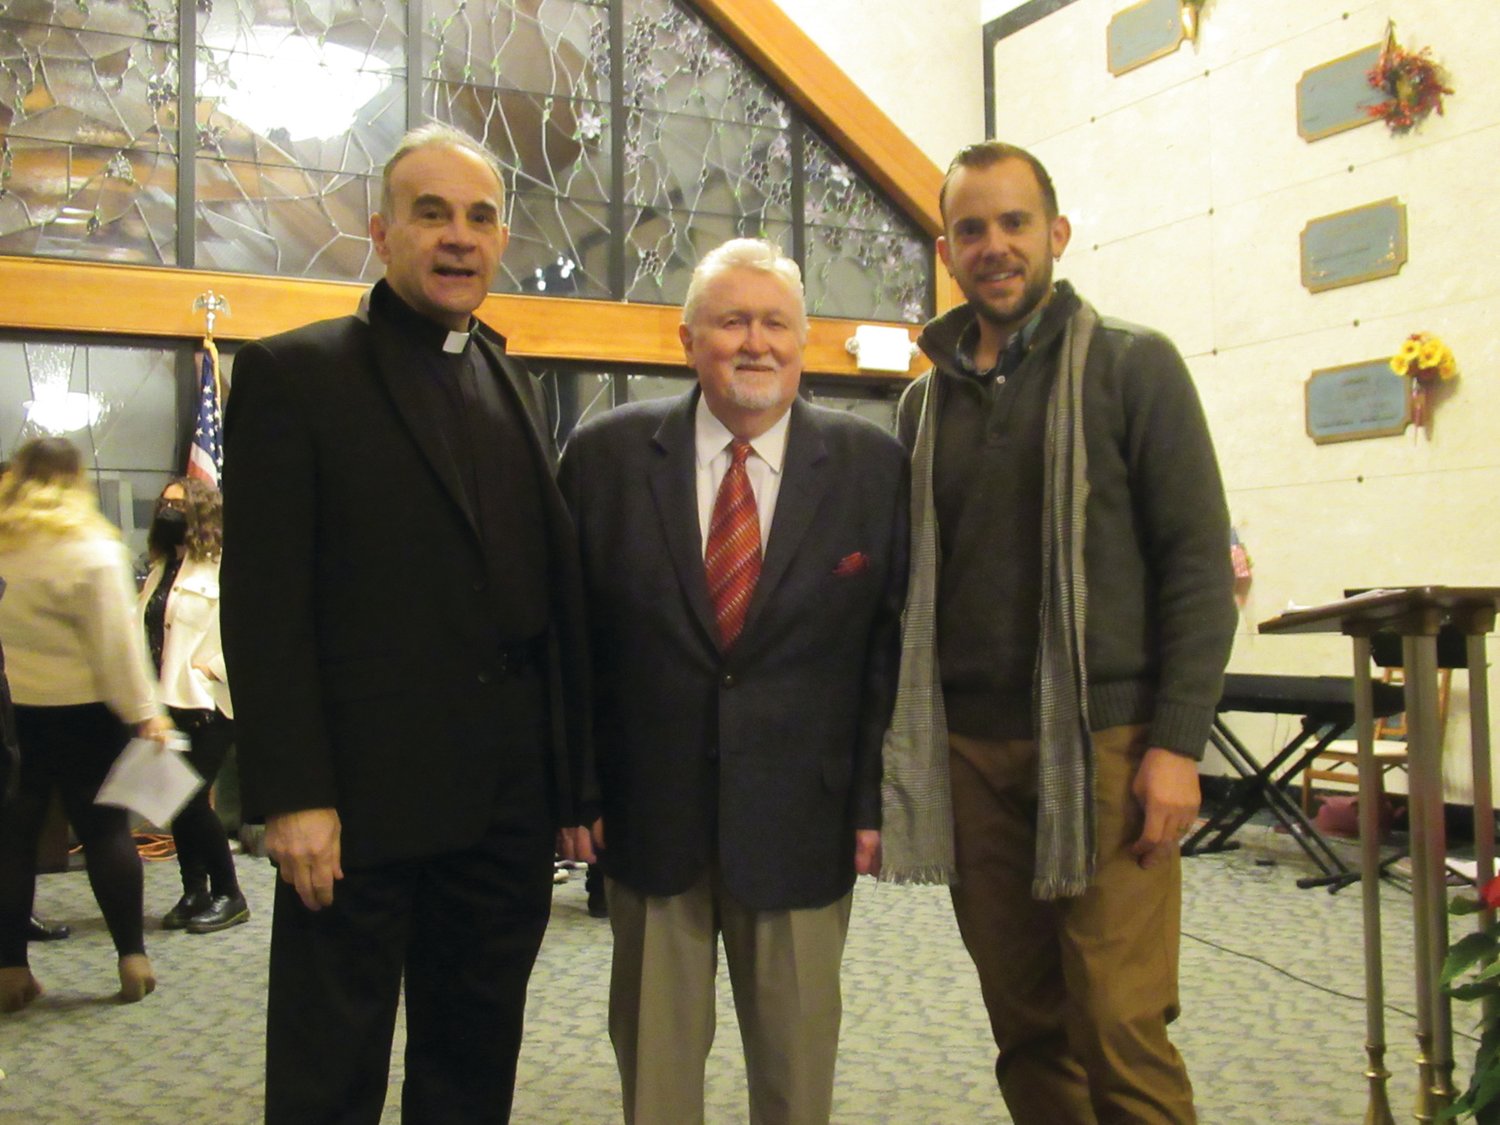 LINKED LEADERS: Joseph Swift (center), president of Highland Memorial Park Cemetery and the Johnston Lions Club, is joined by Rev. Father Albert Ranallo of St. Ann’s  Church in Providence and Matt Gingras, Director of the JHS Concert Chorus, during Sunday’s special Christmas Remembrance Ceremony.